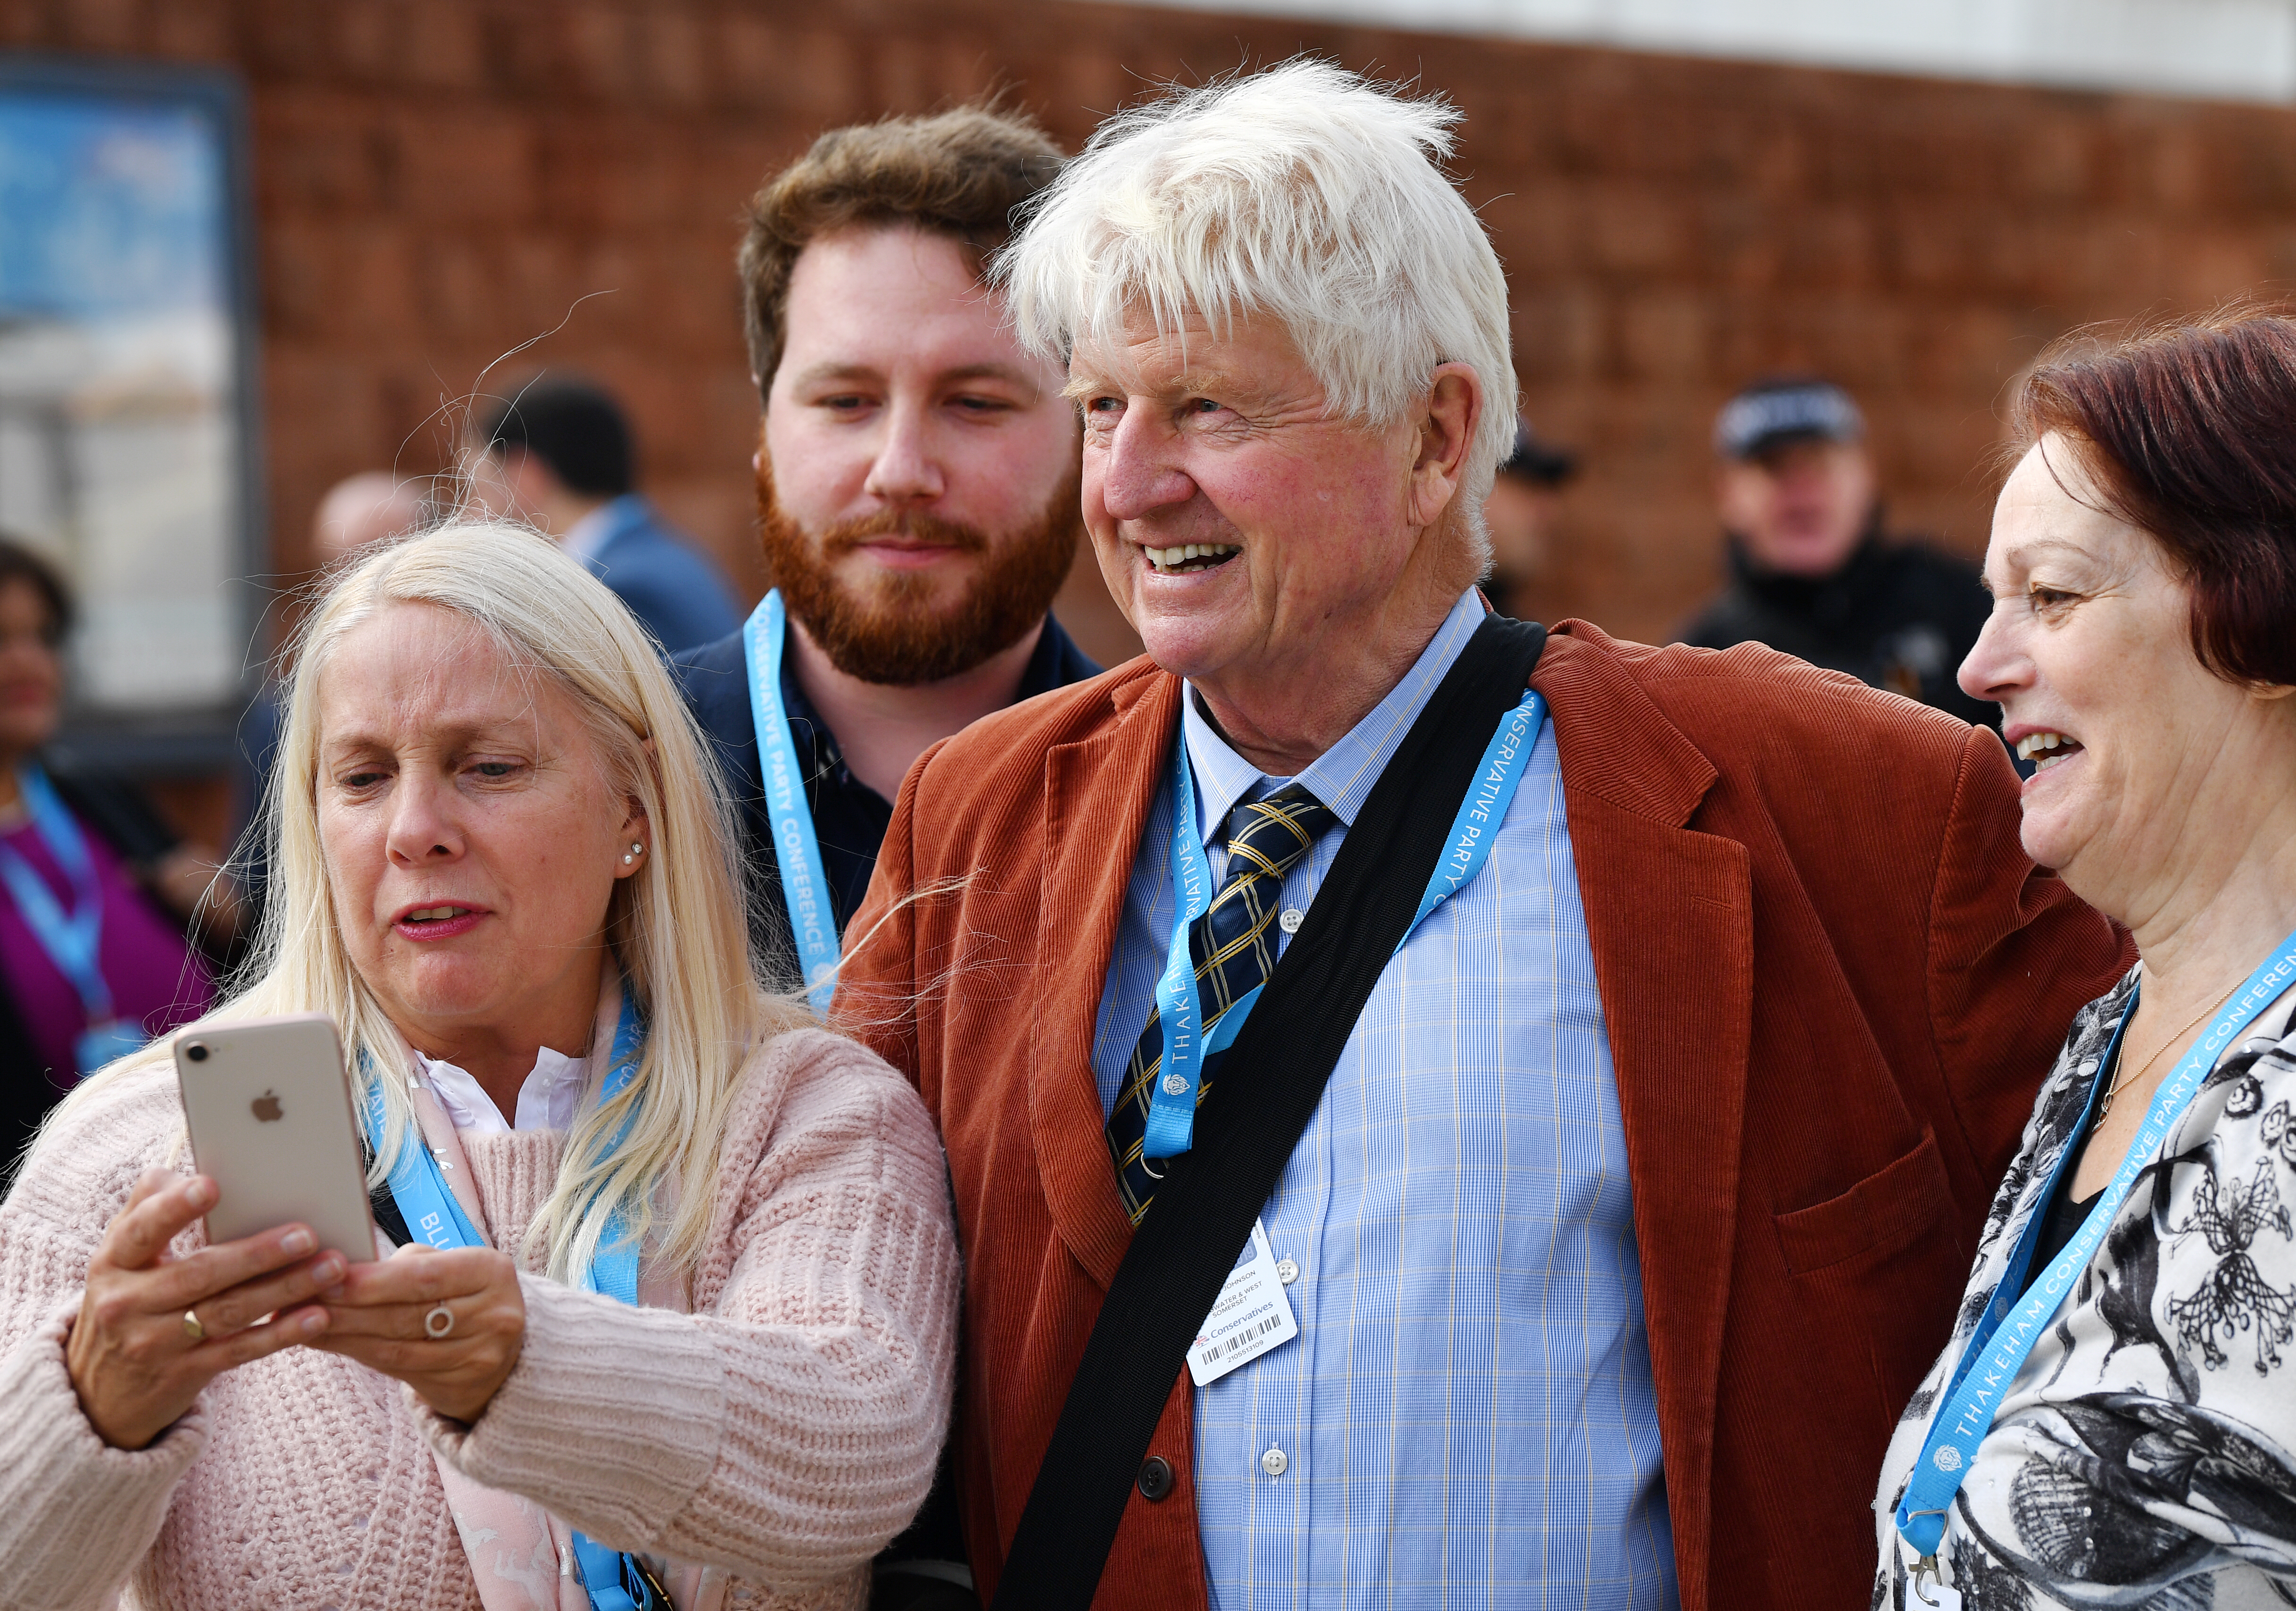 MANCHESTER, ENGLAND - OCTOBER 01: Father of Prime Minister Boris Johnson, Stanley Johnson, is seen on the third day of the Conservative Party Conference at Manchester Central on October 1, 2019 in Manchester, England. Despite Parliament voting against a government motion to award a recess, Conservative Party Conference still goes ahead. Parliament will continue with its business for the duration. (Photo by Jeff J Mitchell/Getty Images)